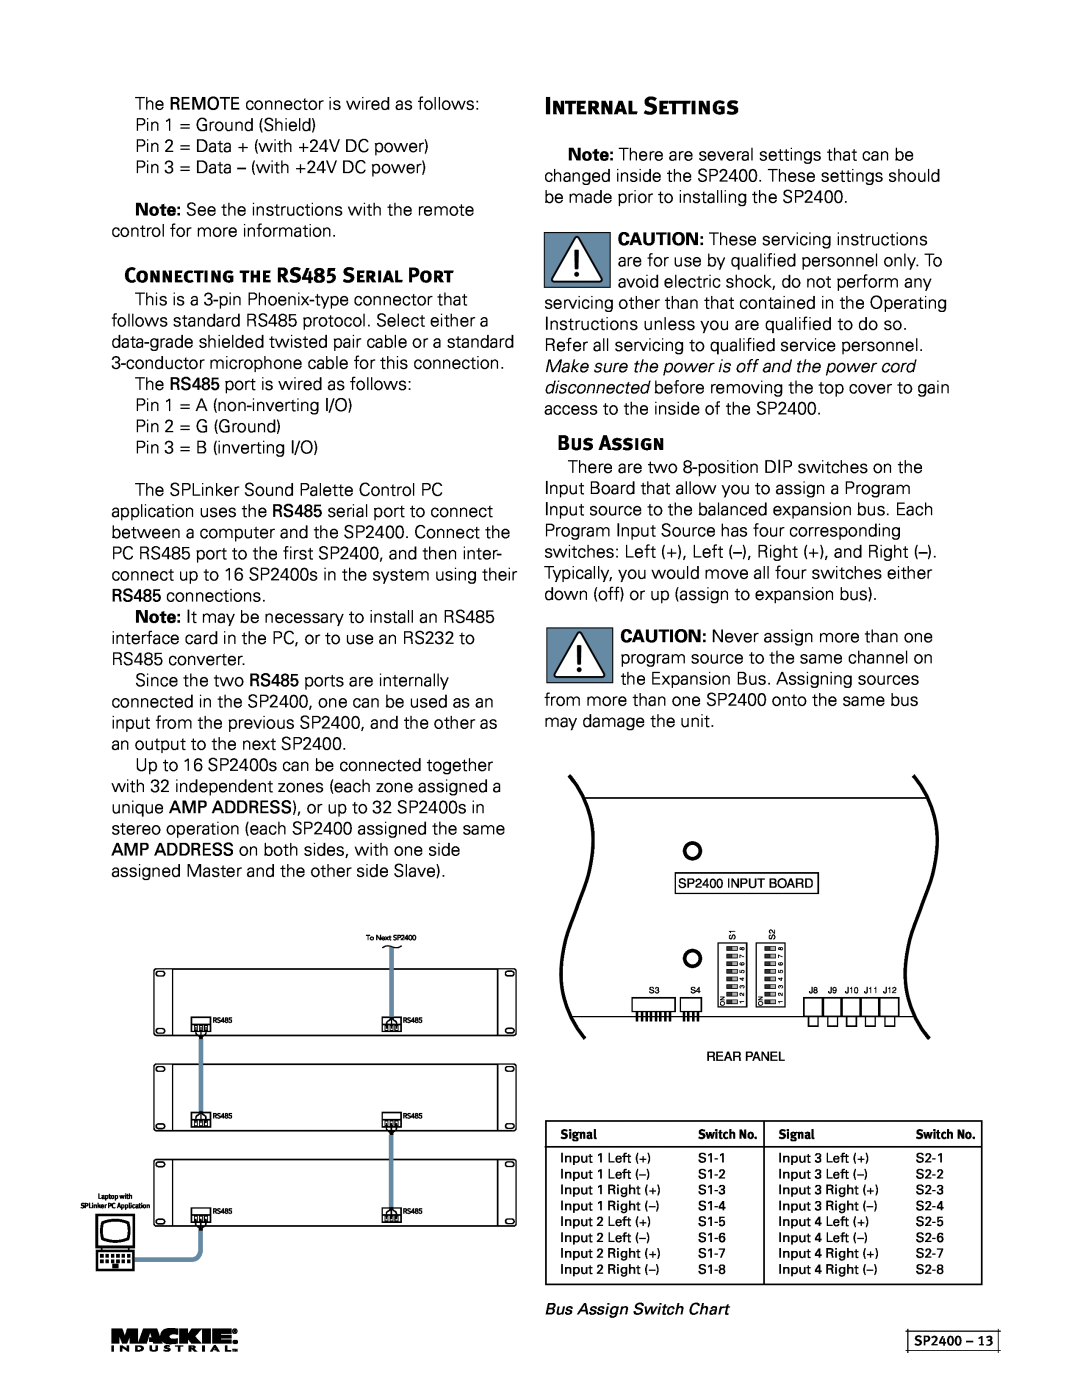 Mackie SP2400 instruction manual Internal Settings, Connecting the RS485 Serial Port, Bus Assign 